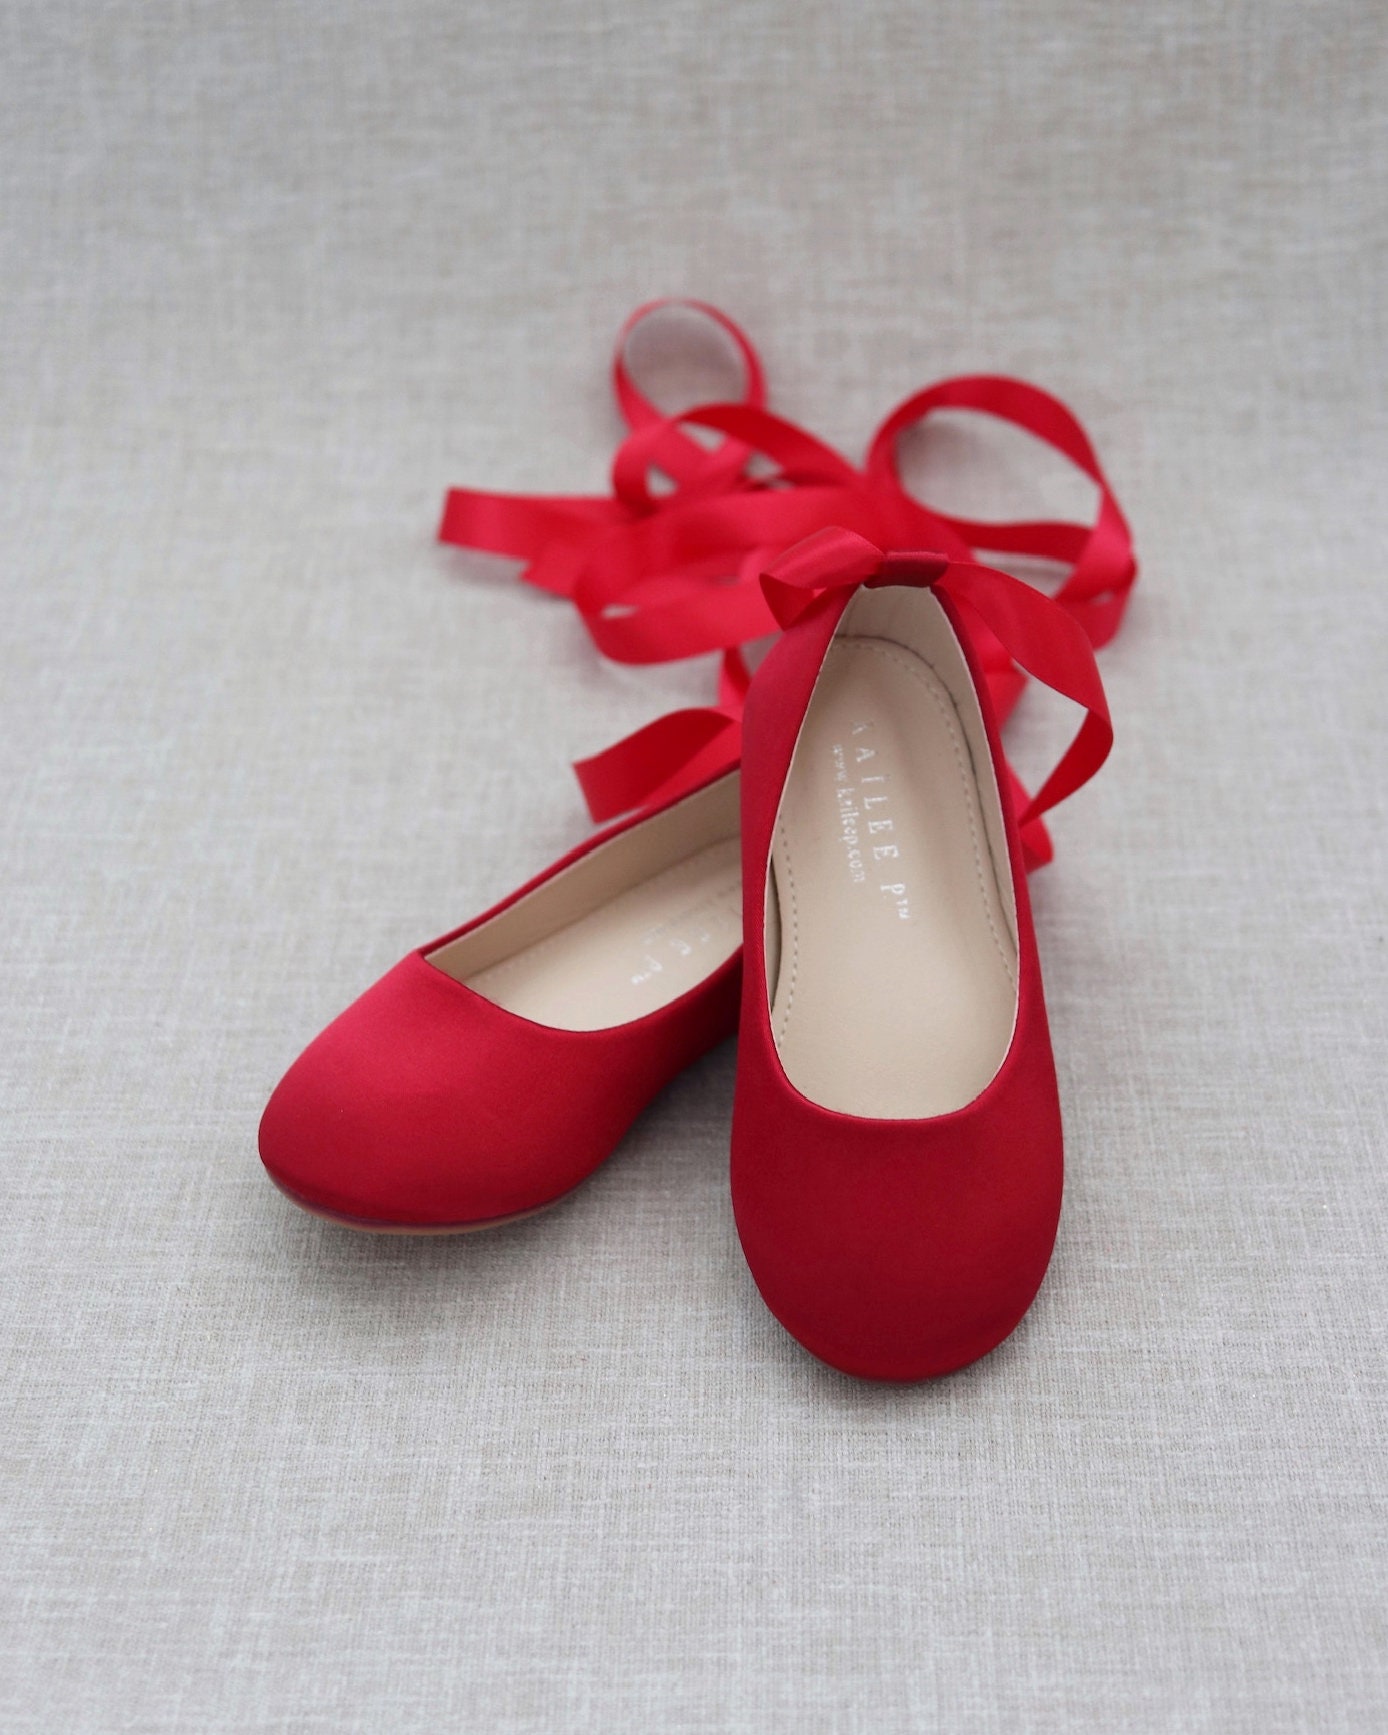 Shoes Red Satin Ballerina Lace up Flats Fall -